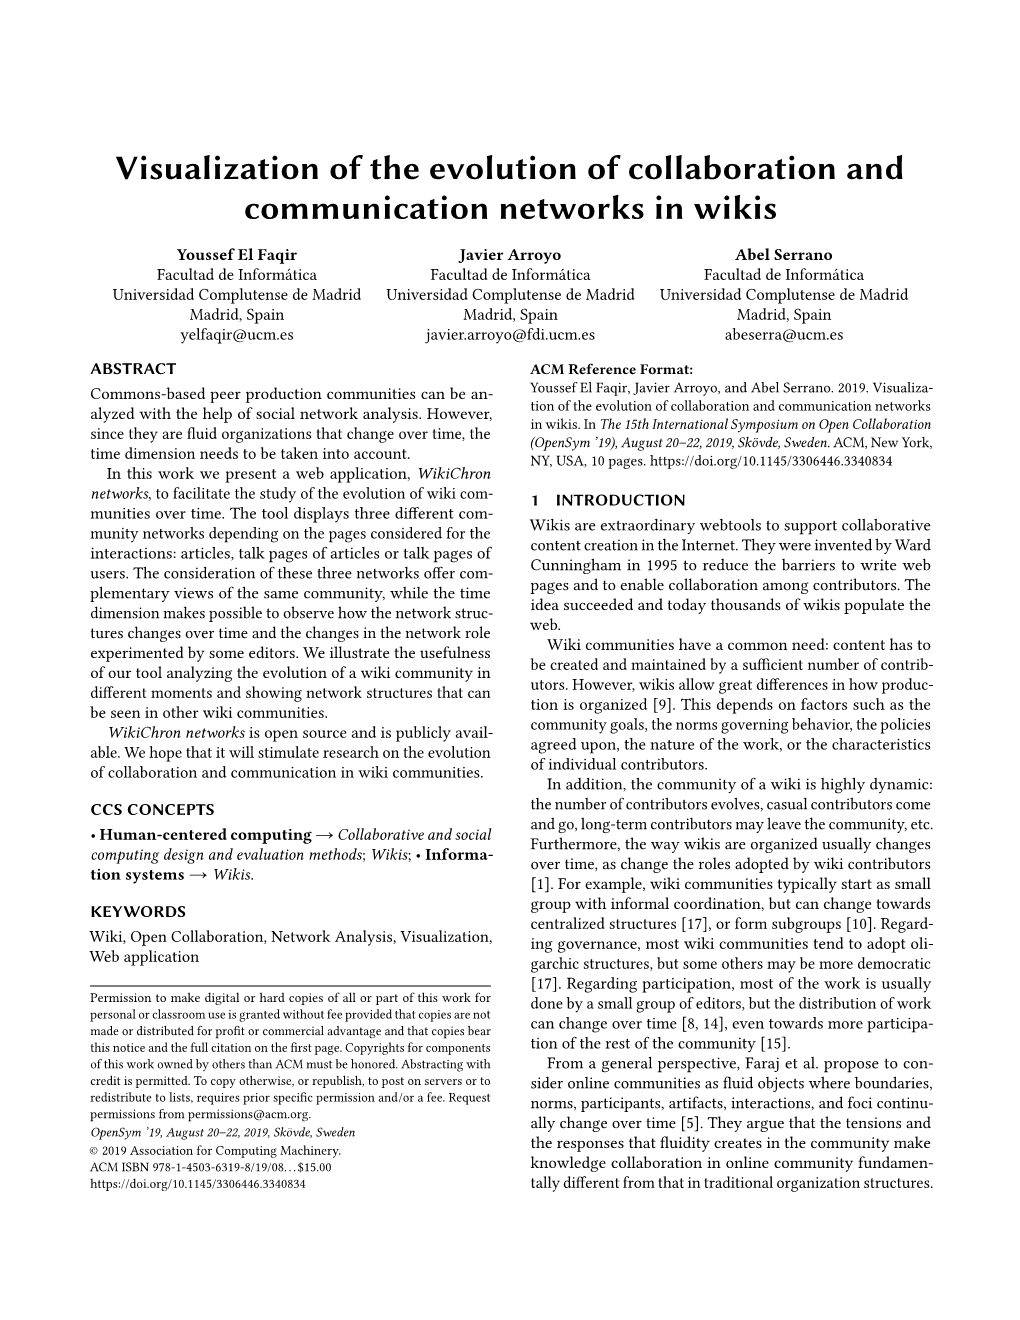 Visualization of the Evolution of Collaboration and Communication Networks in Wikis